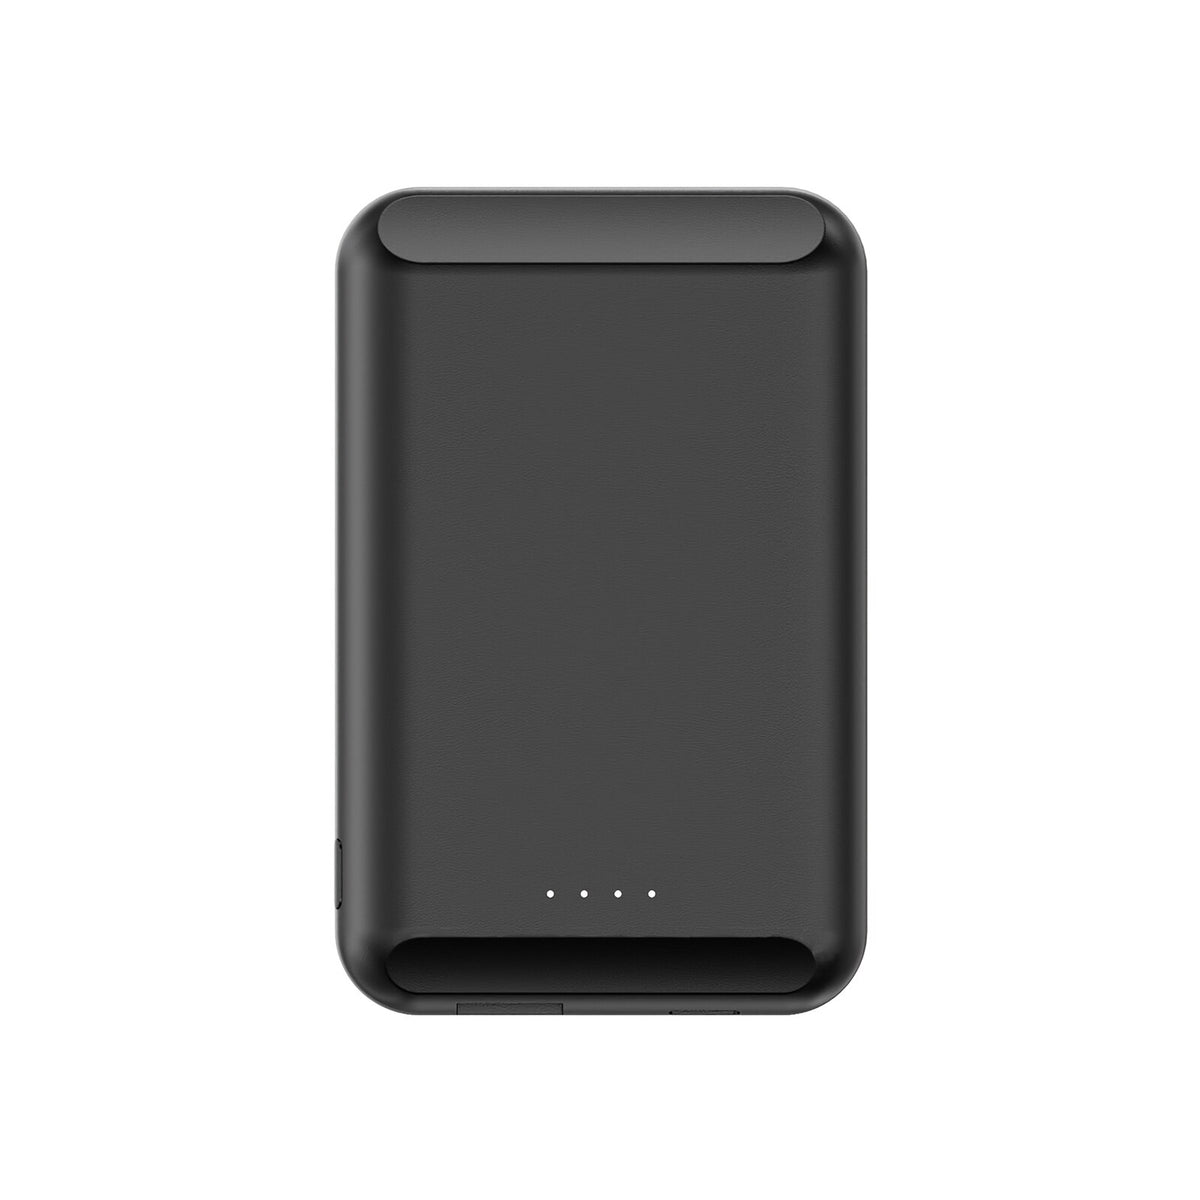 A Built-In N52 Magnet Power Bank 5000mAh is a portable charging device that uses a built-in N52 magnet and has a 5000mAh battery capacity. It likely also features an LED light. This power bank can be used to charge mobile devices such as smartphones and tablets while on the go, by connecting the device to the power bank via a charging cable.